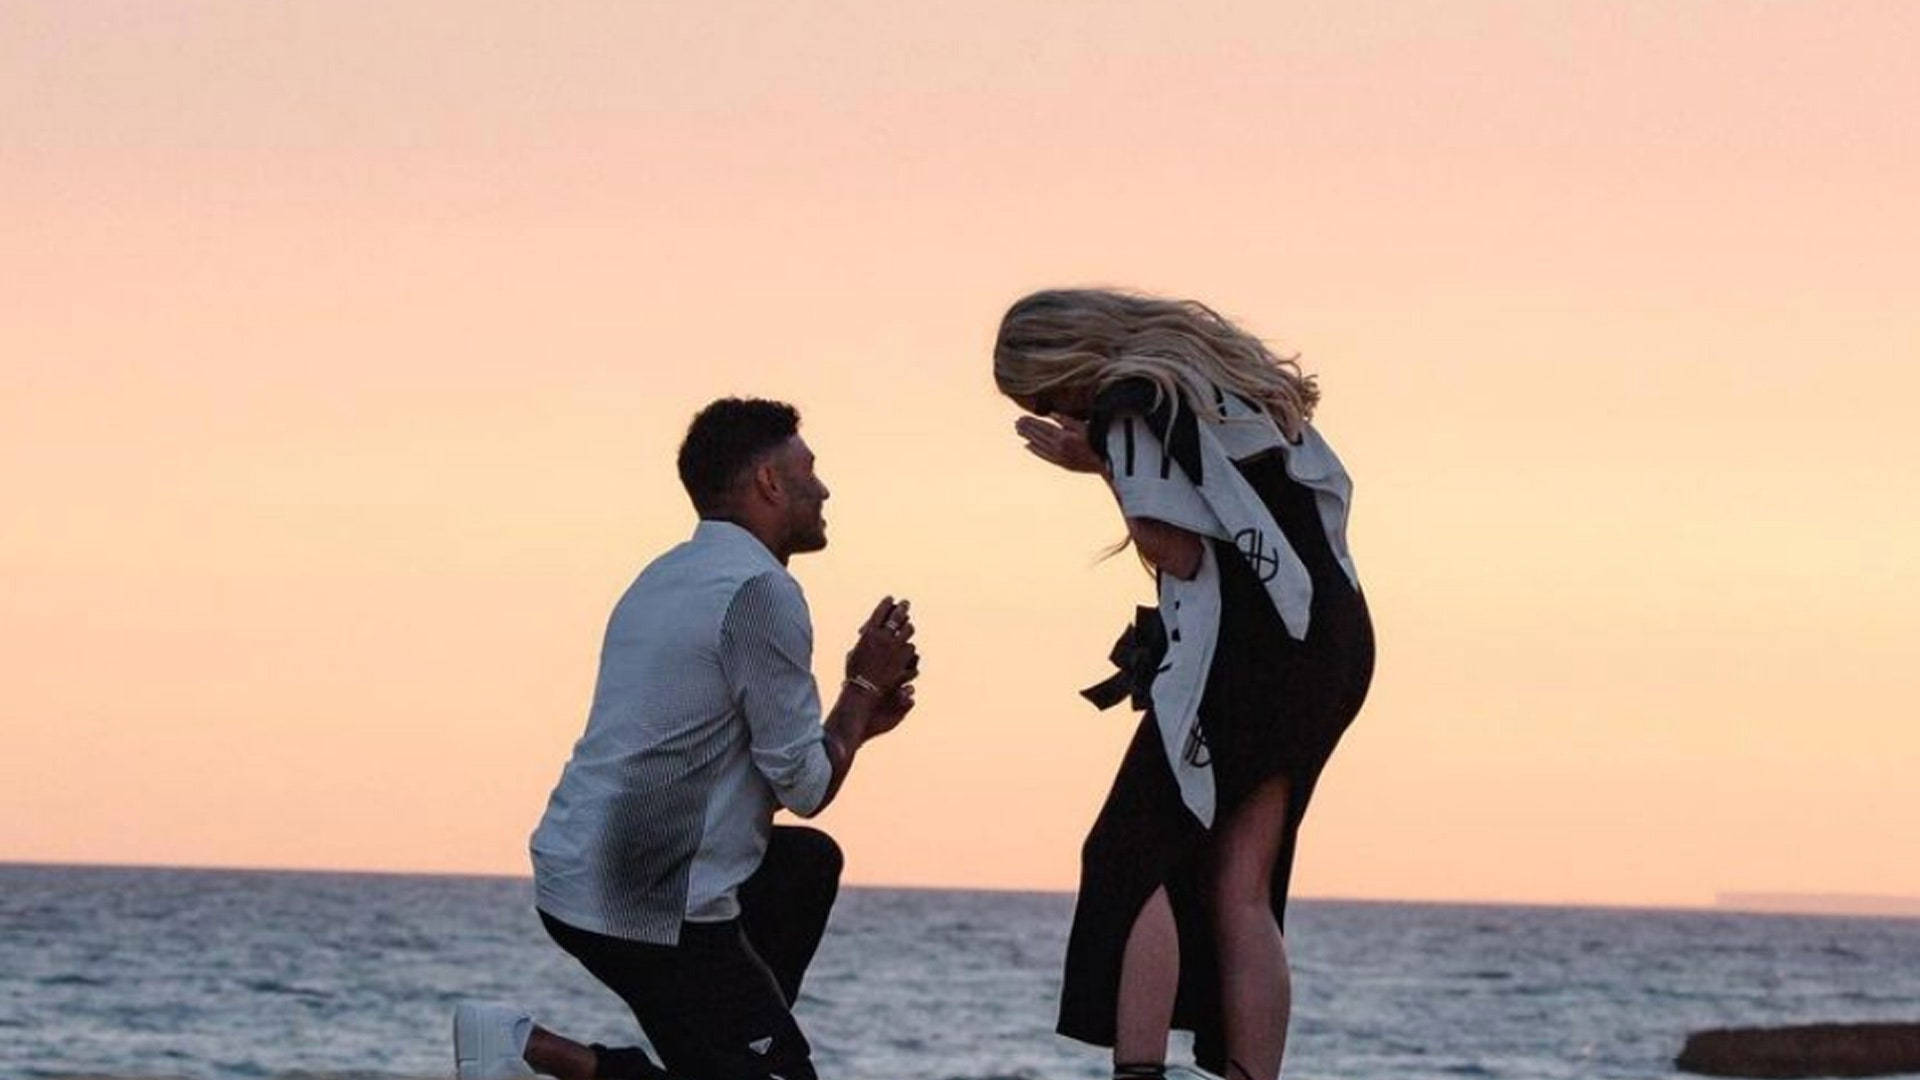 Alex Oxlade-Chamberlain Proposing To Perrie Wallpaper